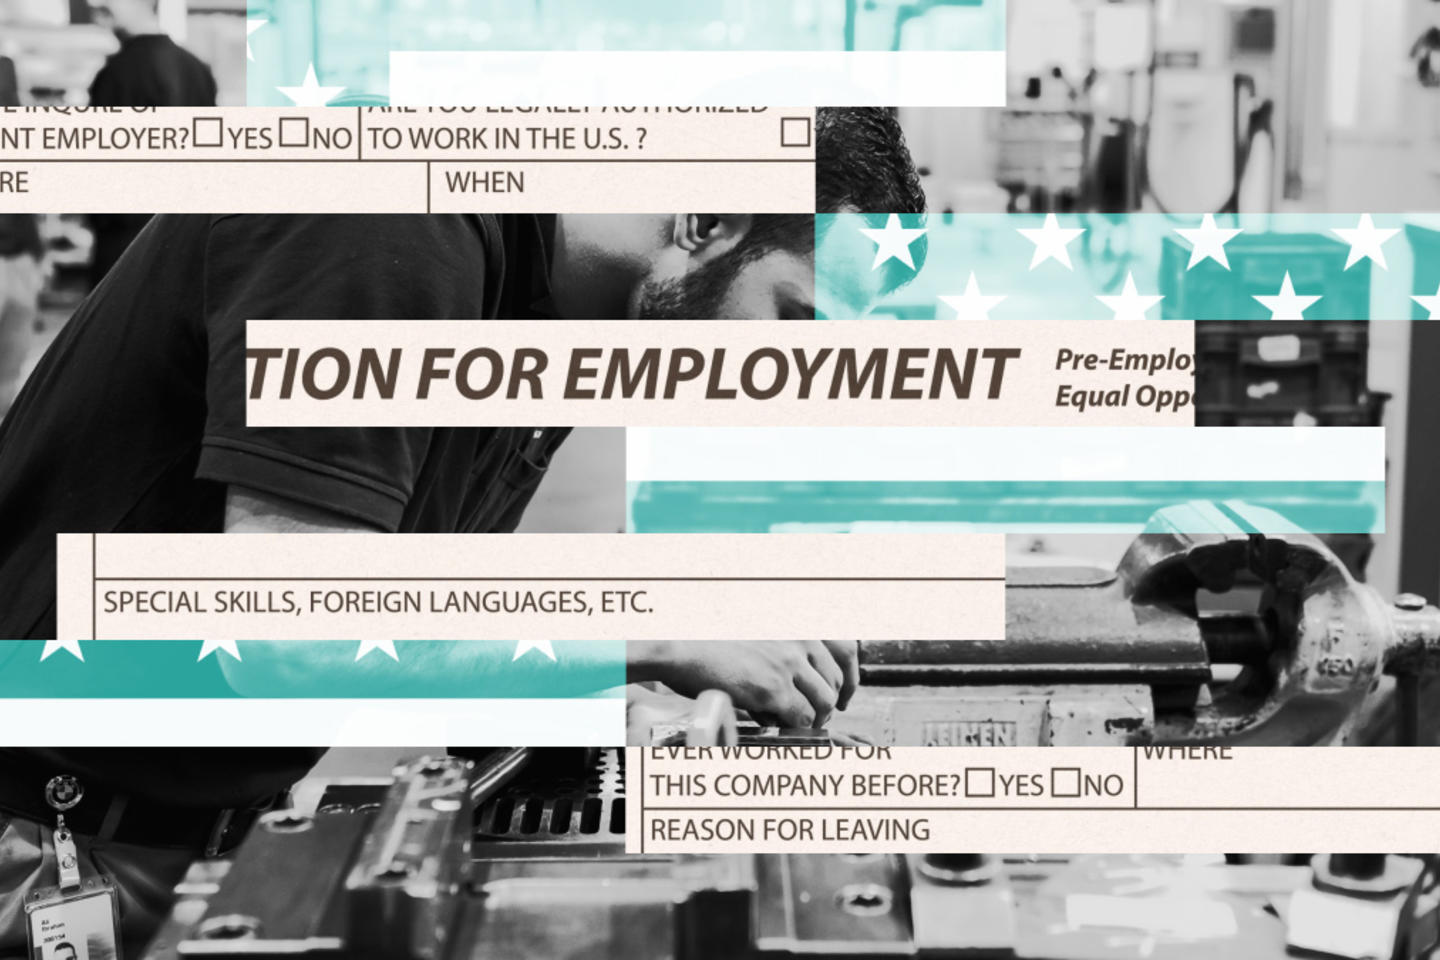 An image showing pieces of an application for employment interspersed with the American flag and a person using shop equipment